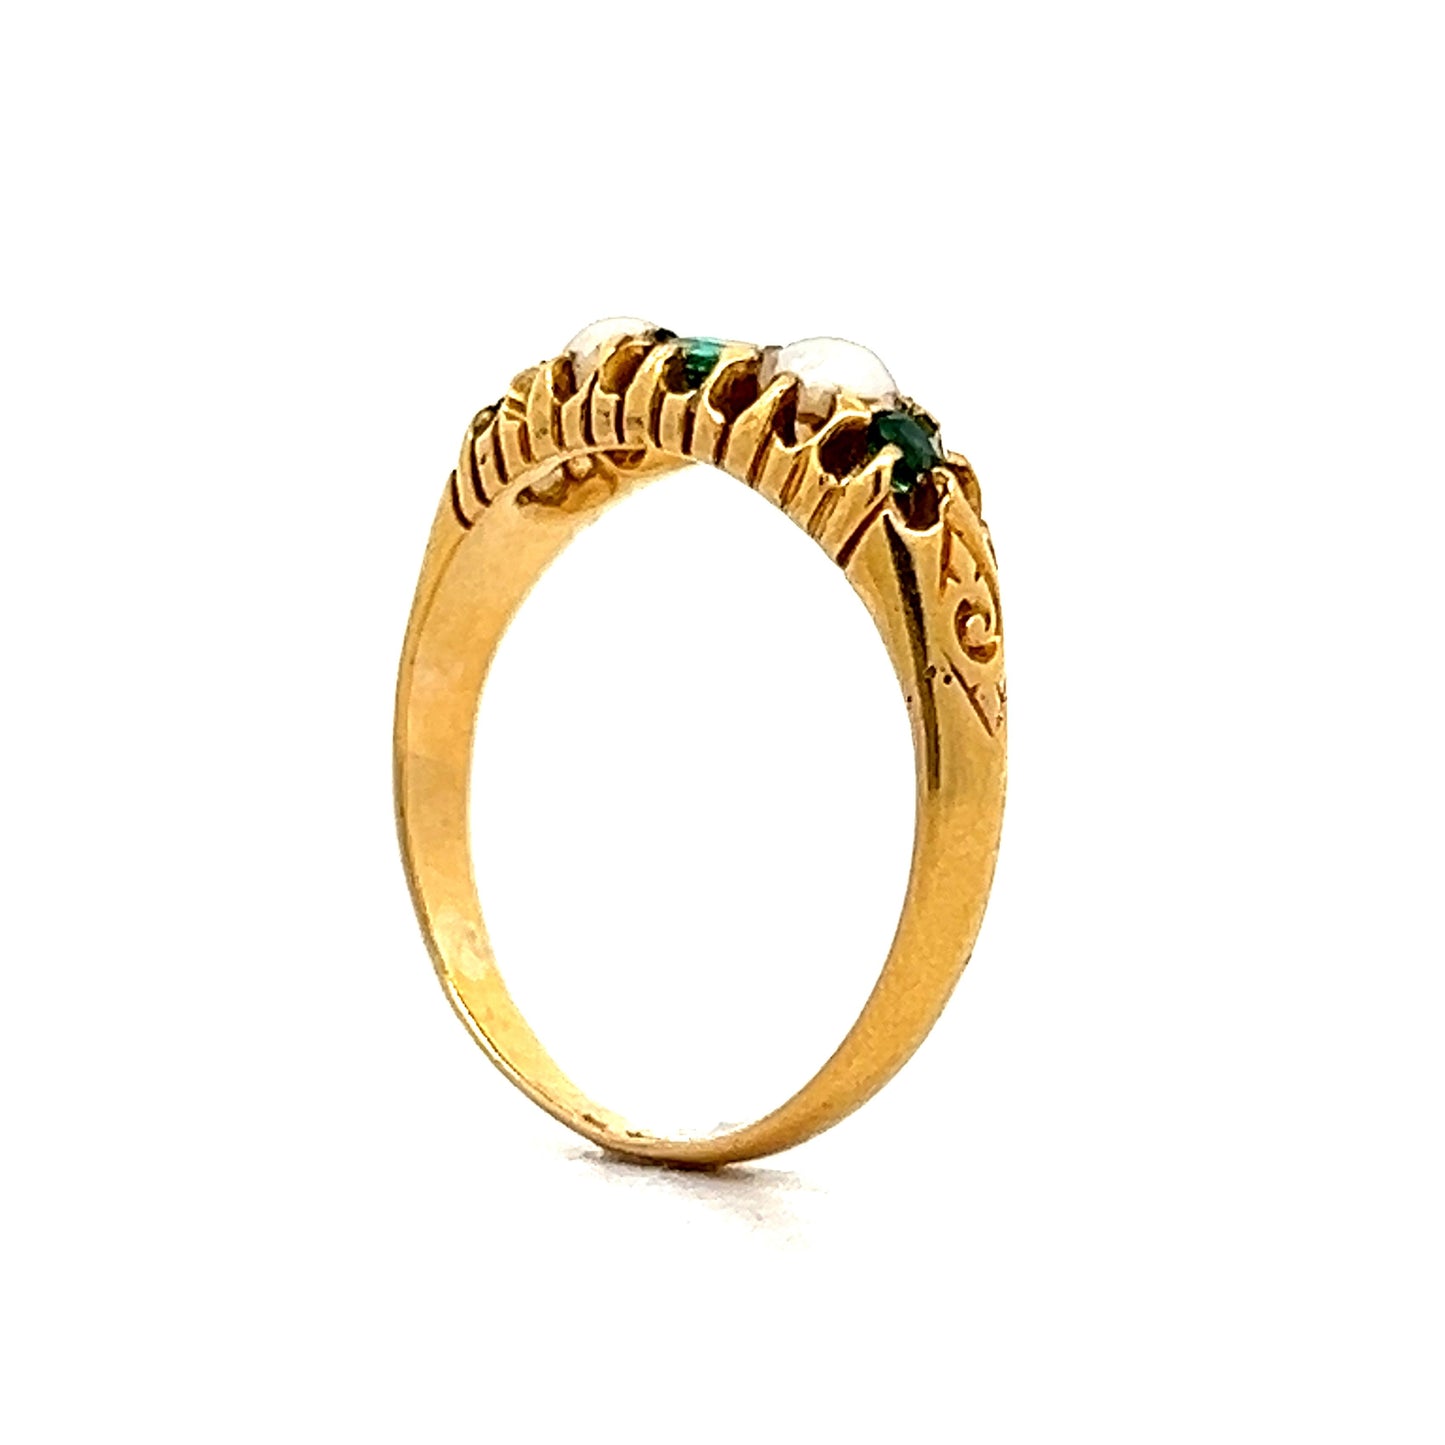 Vintage Victorian .10 Emerald & Pearl Ring in Yellow Gold